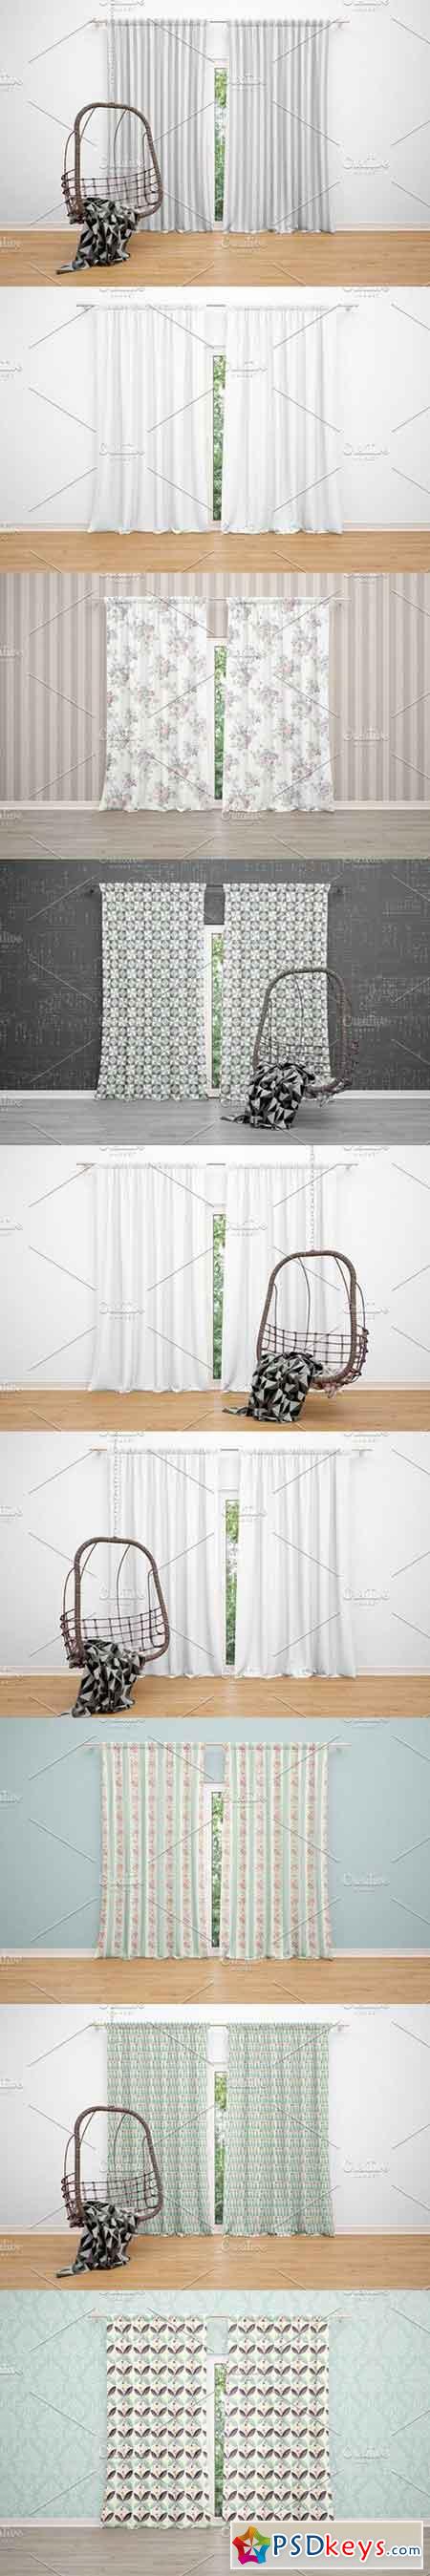 Download Curtains Mockup 1656261 » Free Download Photoshop Vector Stock image Via Torrent Zippyshare From ...